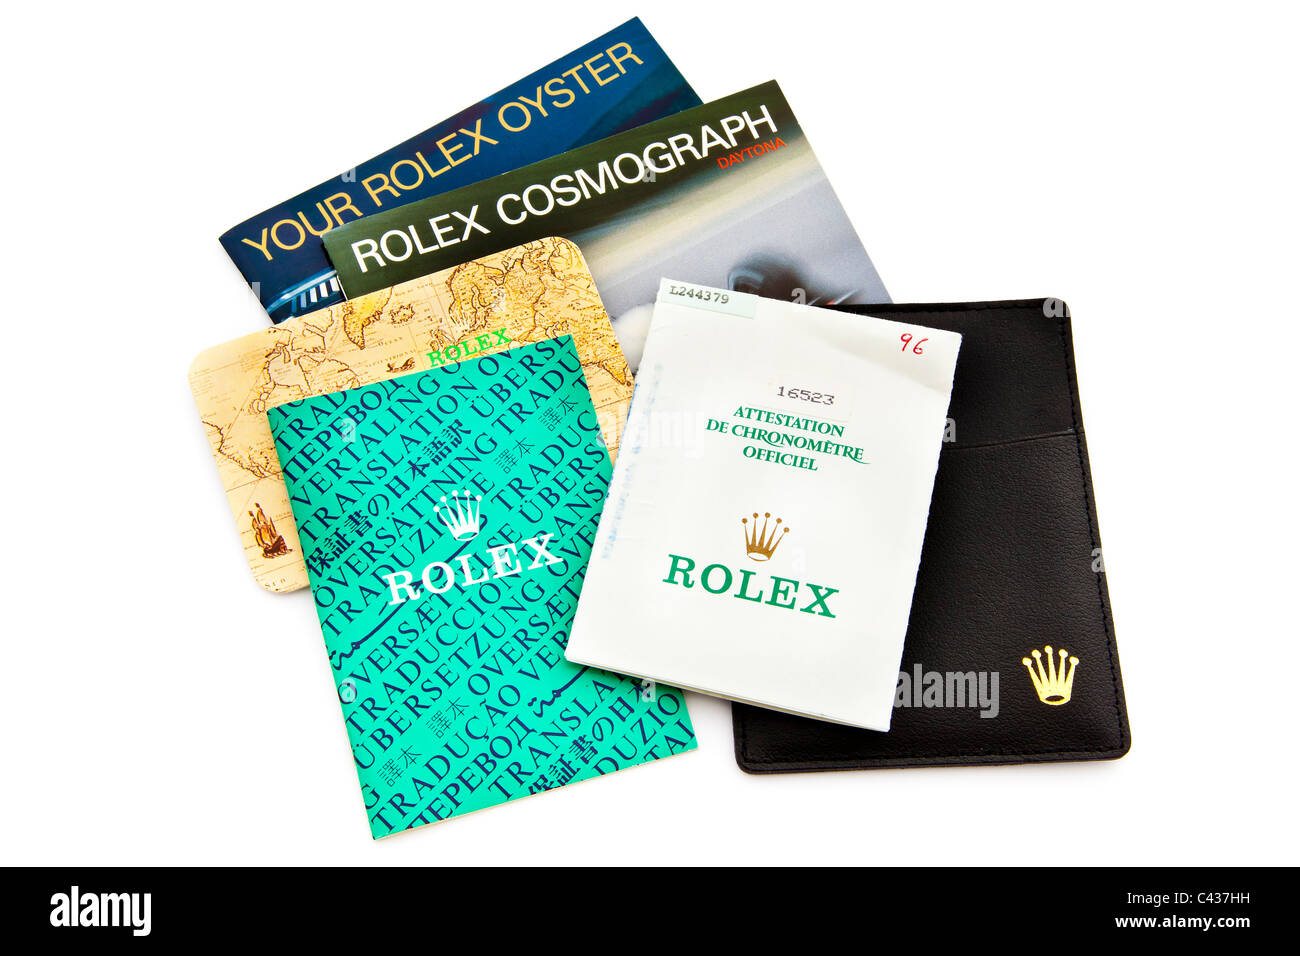 Papers for Rolex Daytona Cosmograph Oyster Perpetual Chronometer wrist watch JMH4905 Stock Photo